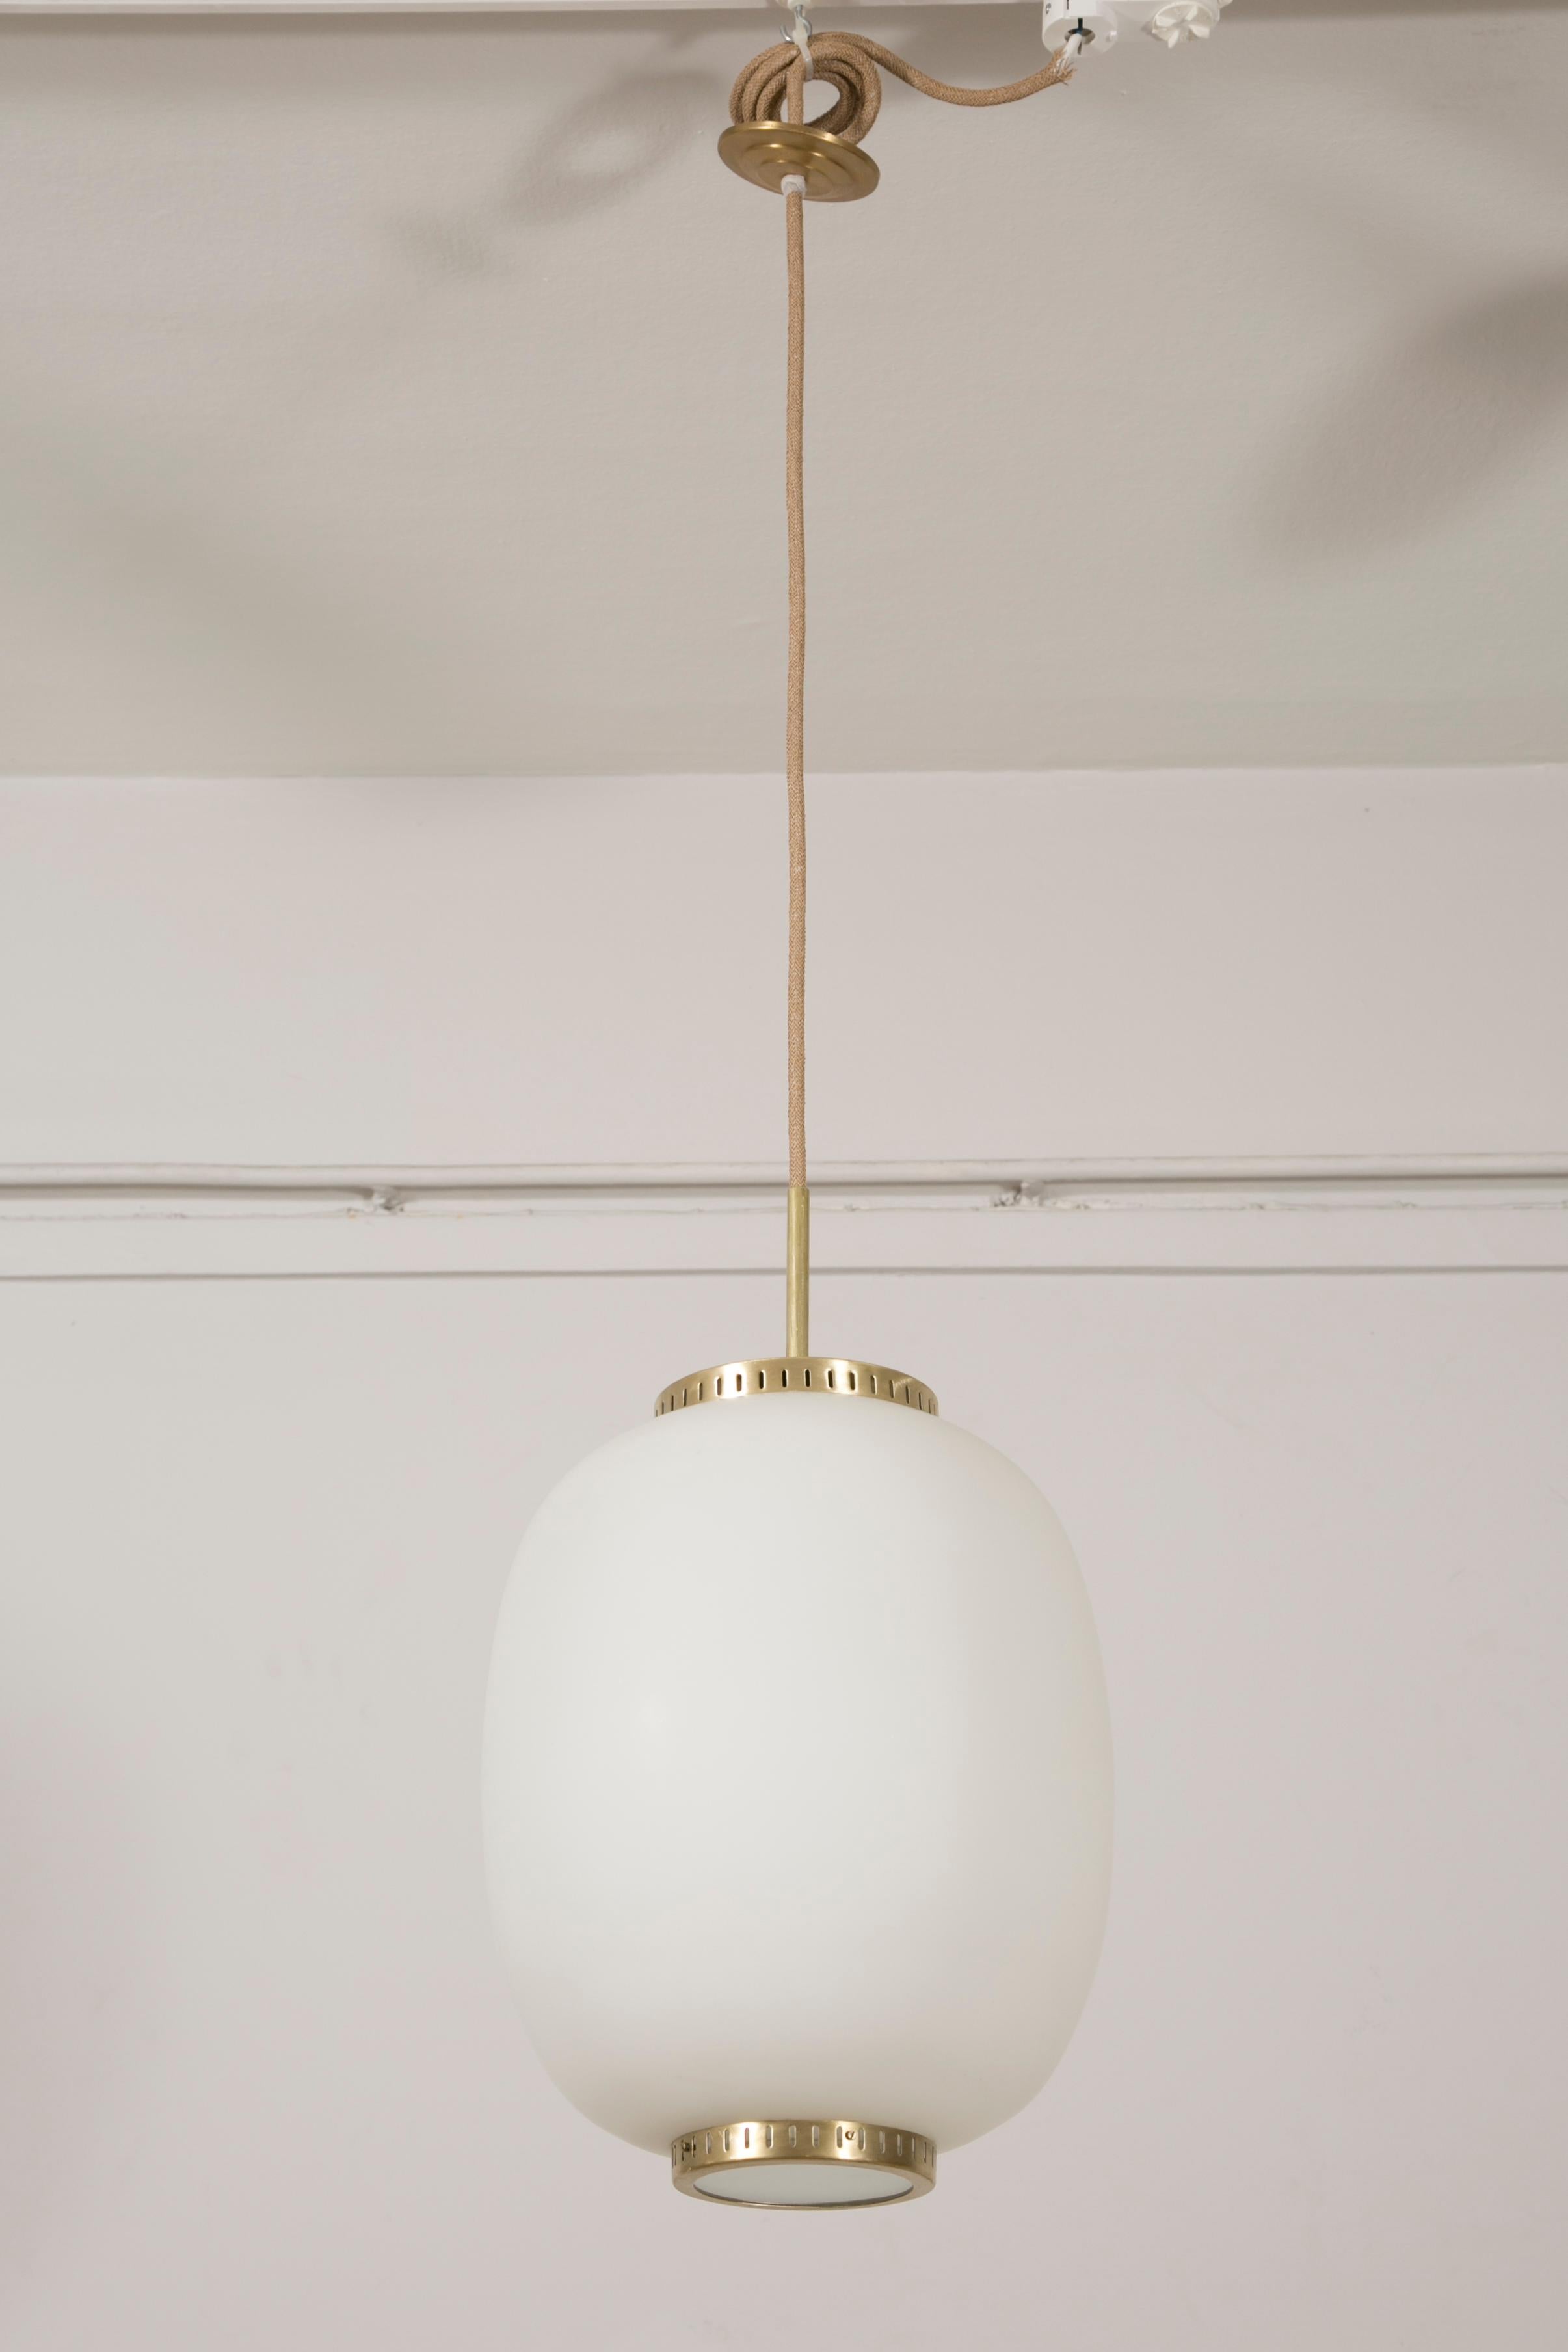 Collection of 8 Opaline Glass and Brass Ceiling Fixtures, Bent Karlby for Lyfa 1